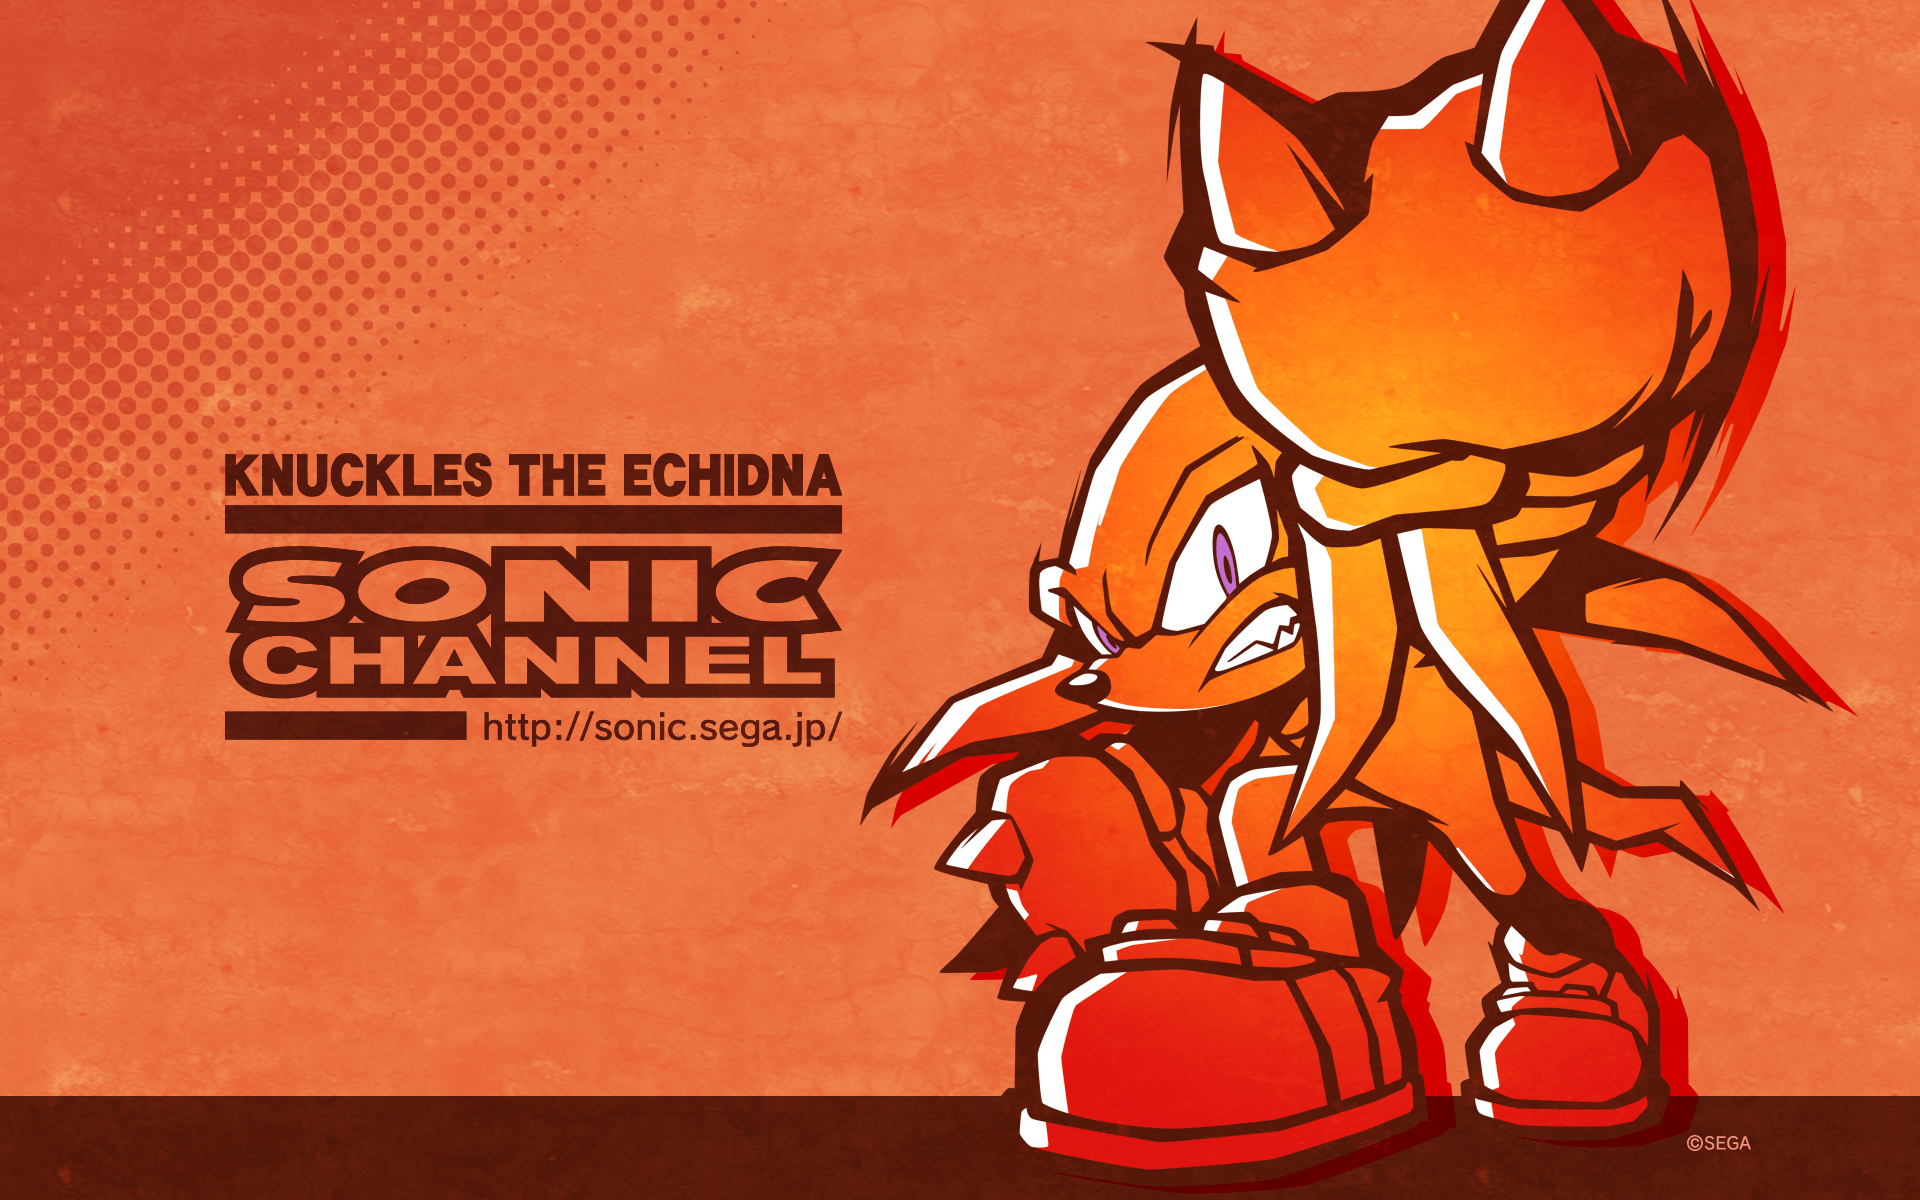 Sonic Channel: May 2019 calendar character is Knuckles the Echidna